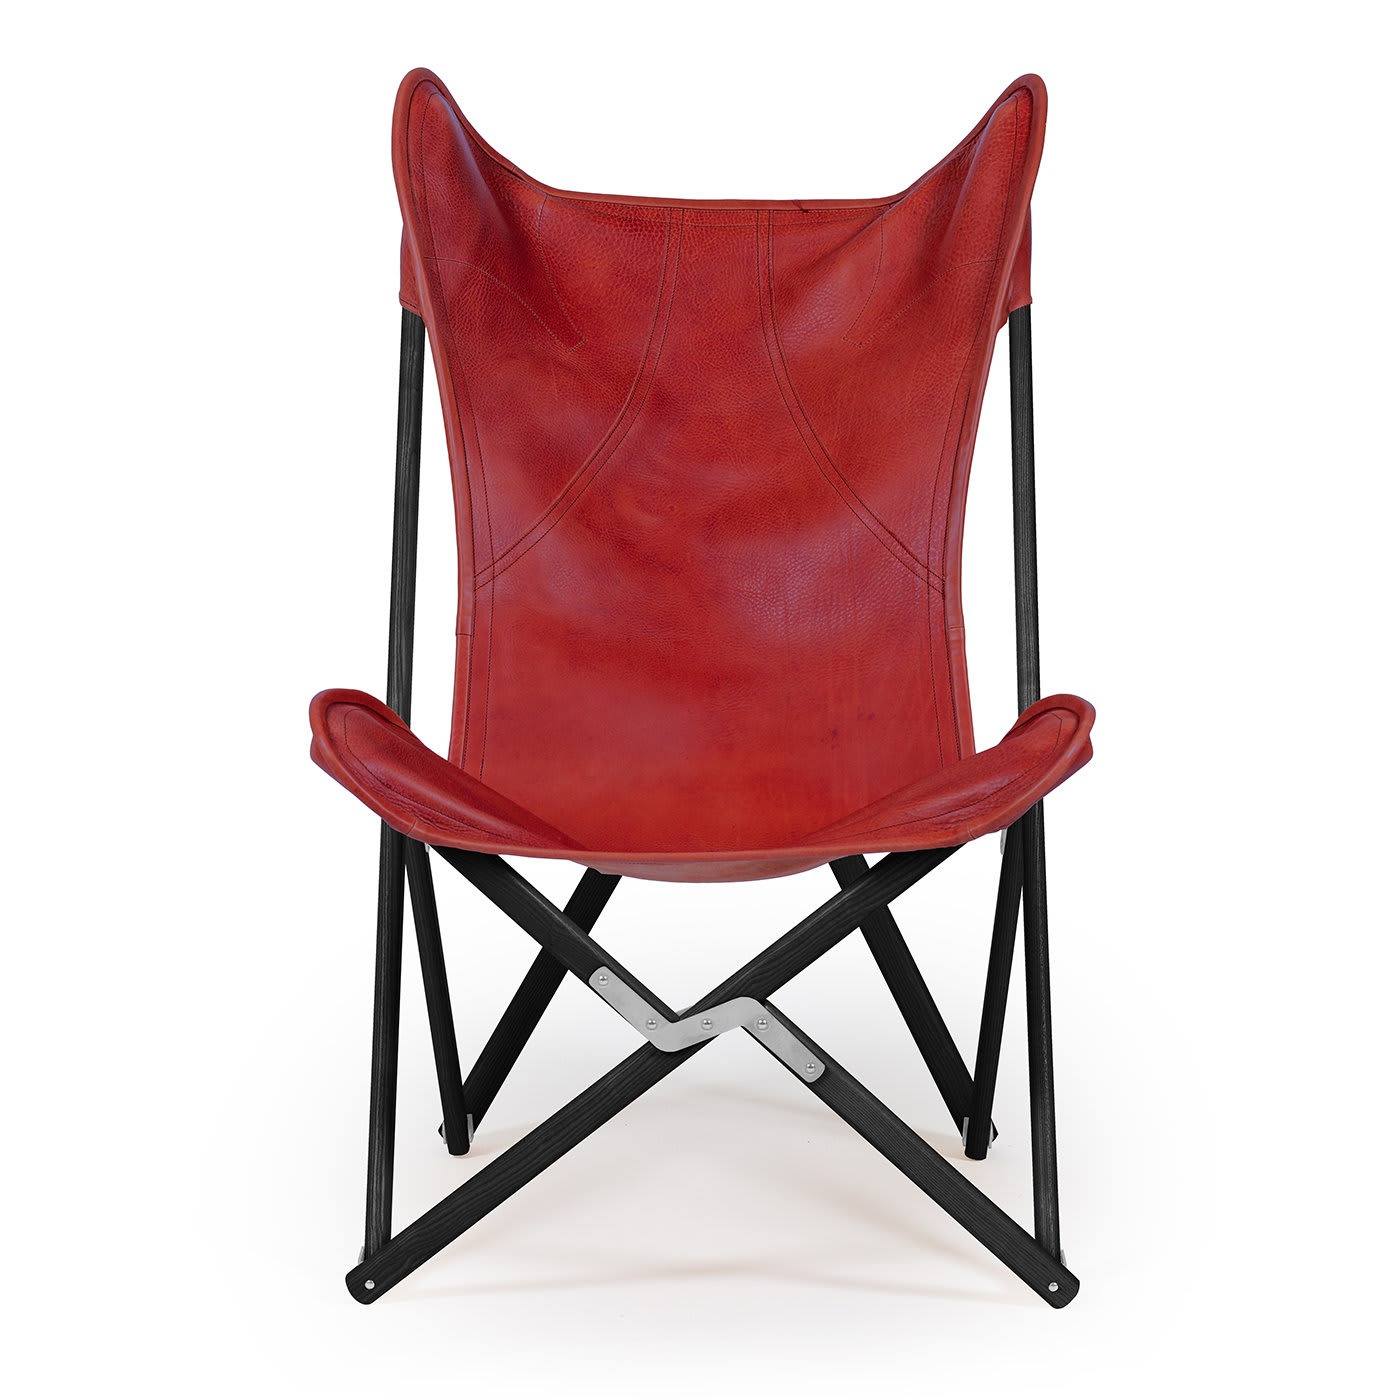 Tripolina Armchair in Red Leather - Telami